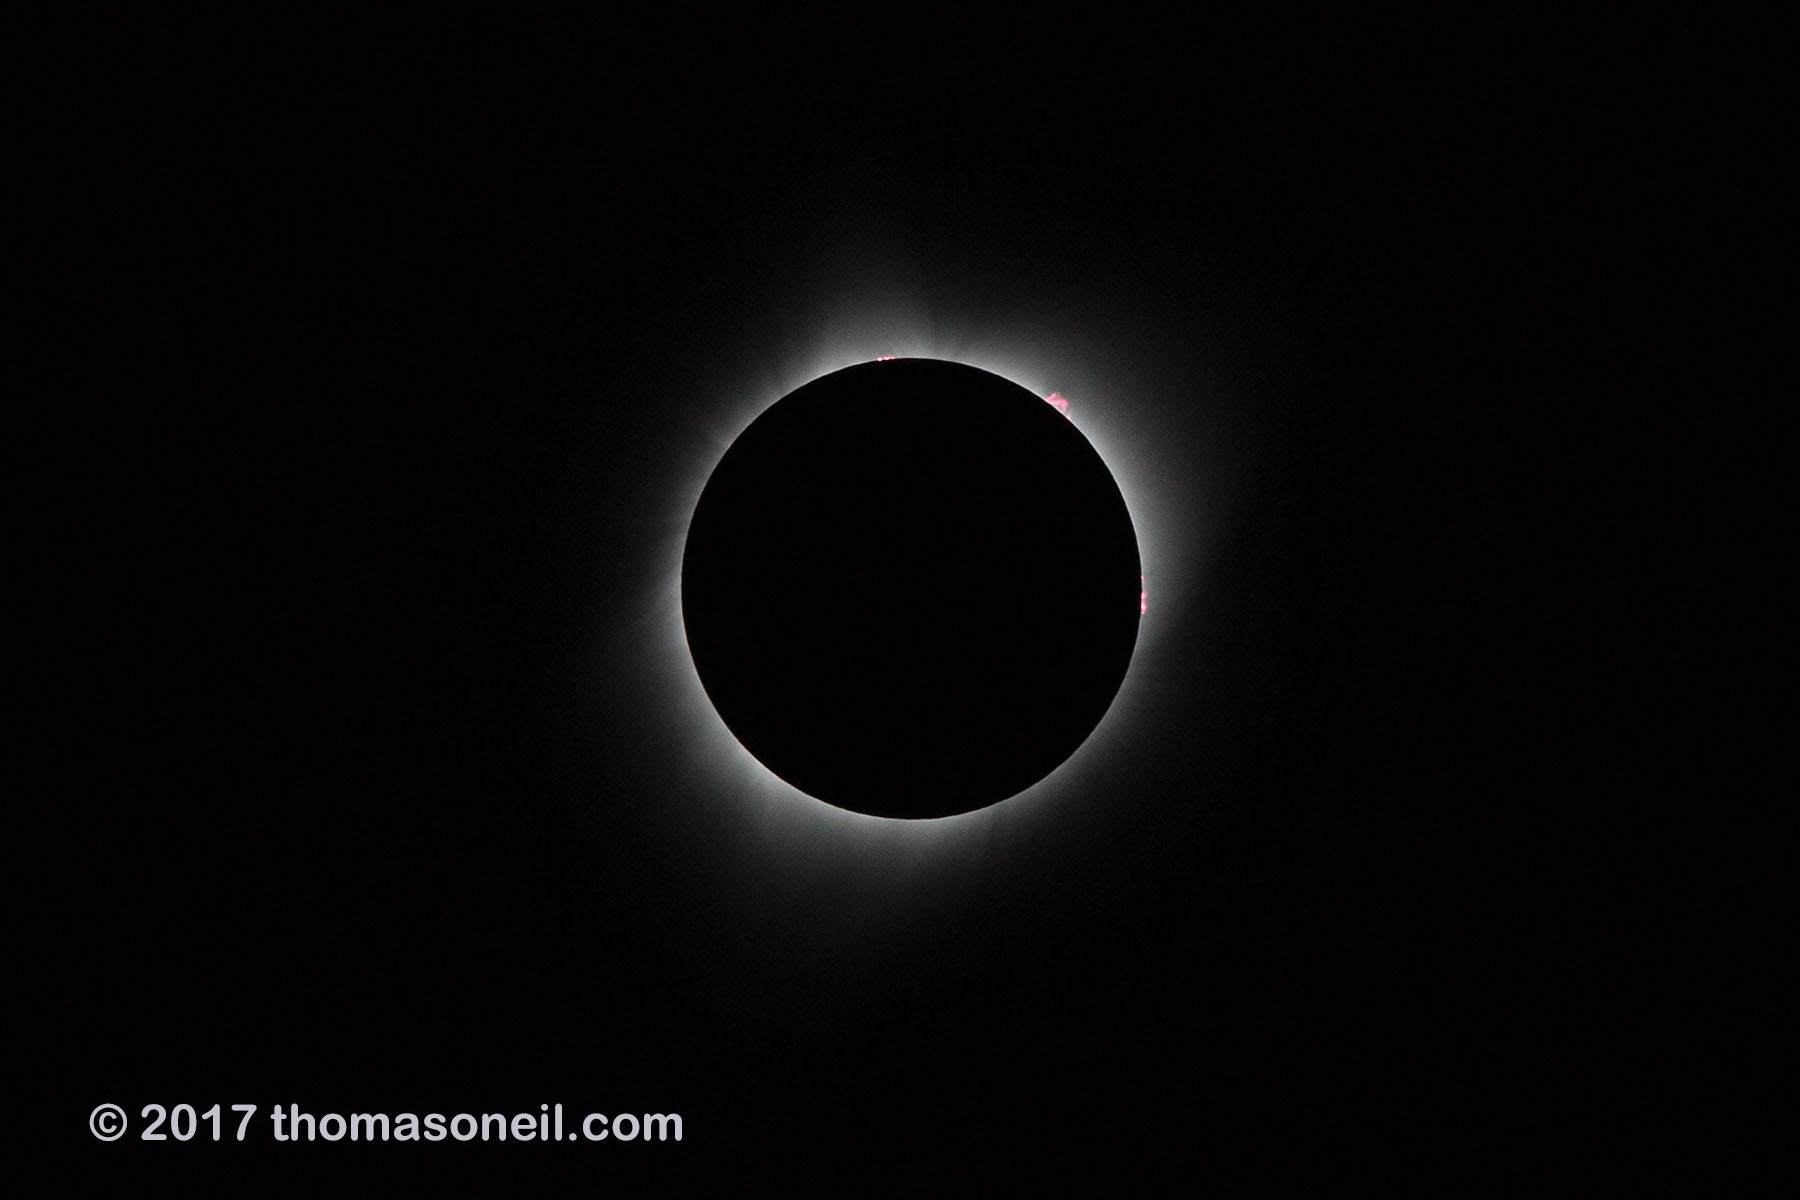 Solar eclipse, Aug. 21, 2017, very fast shutter speed (1/2500) reveals prominences rising from surface of the sun at 12:00, 1:00 and 3:00.  Click for next photo.